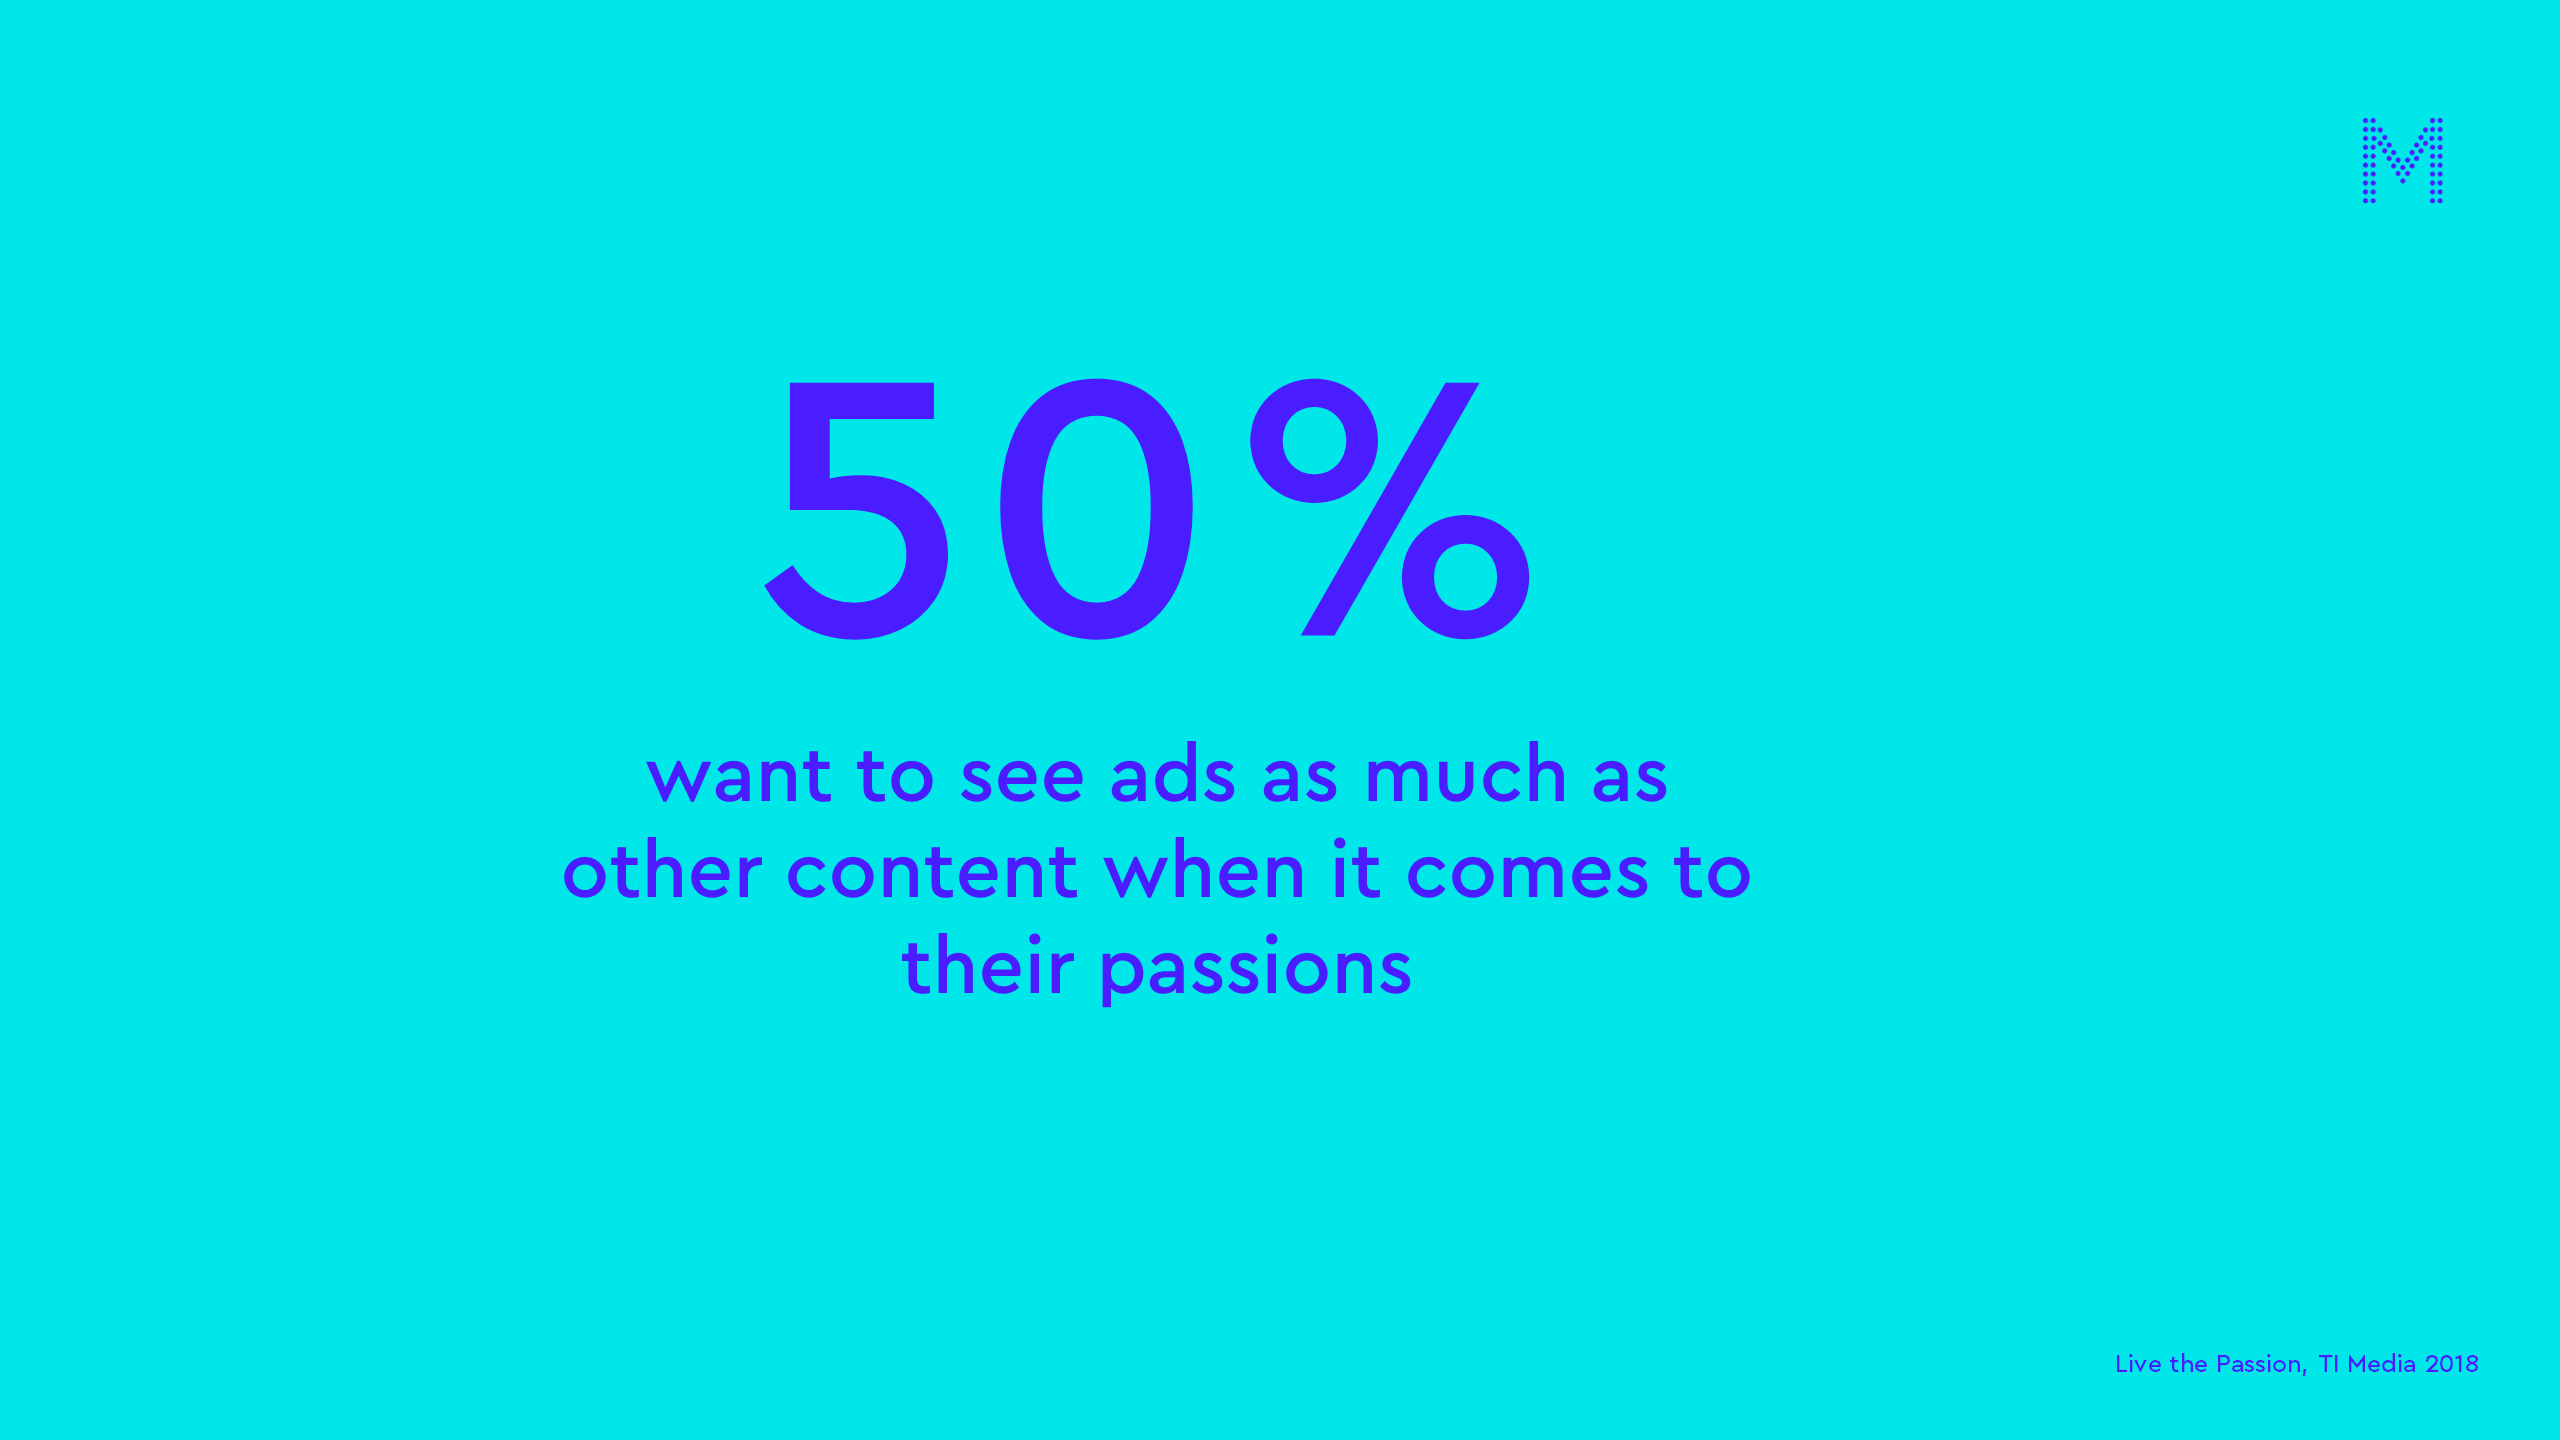 half want to see ads as much as other content when it comes to their passions